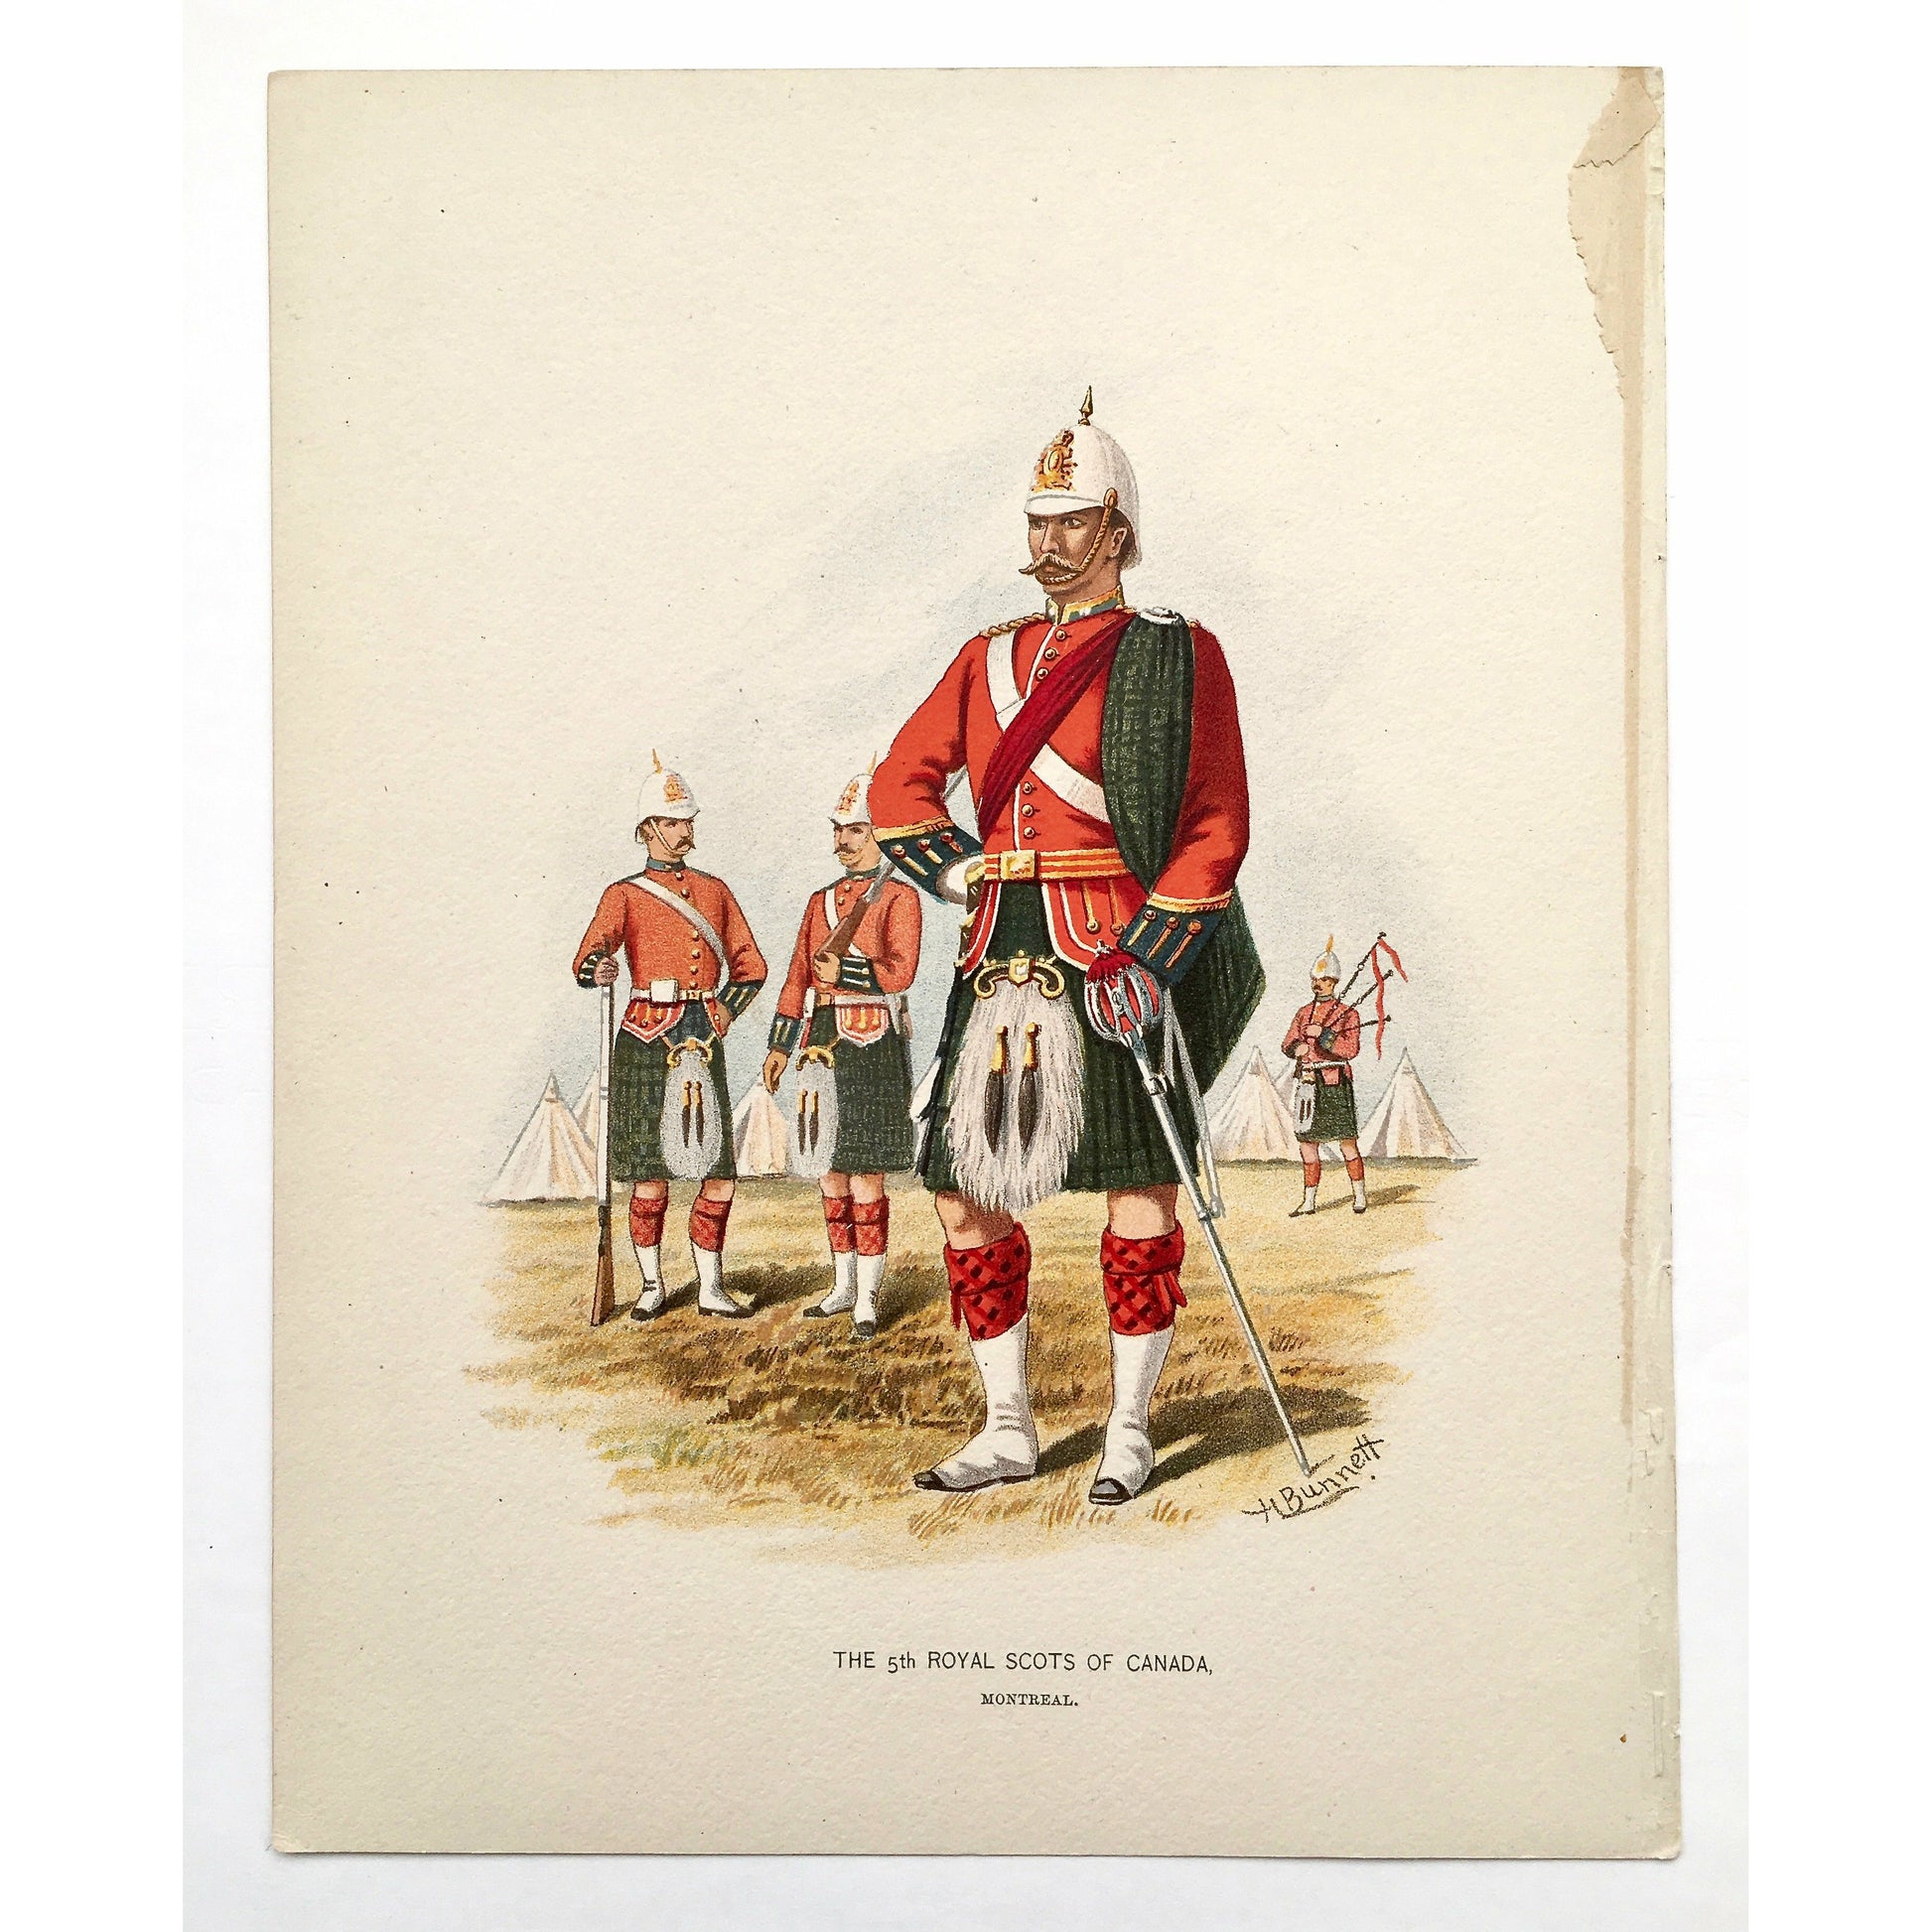 The 5th Royal Scots of Canada, Scots, Royal Scots, Scottish, Scotland, Kilts, bagpipes, Montreal, Canada, Artillery, Military, Military Costume, Horses, Riding, Costume, Uniform, Her Majesty's Army, Regiments, Queen's Forces, H. Bunnett, Bunnett, Sword, Army, London, 1890, Military Prints, Canadian, Canadian Military, Canadian Army, Armed Forces, Military Uniform, Chromolithograph, J. S. Virtue & Co., Antique Prints, Antique, Prints, Militia, Original, Interior decor, office art, army art, queen's army, art